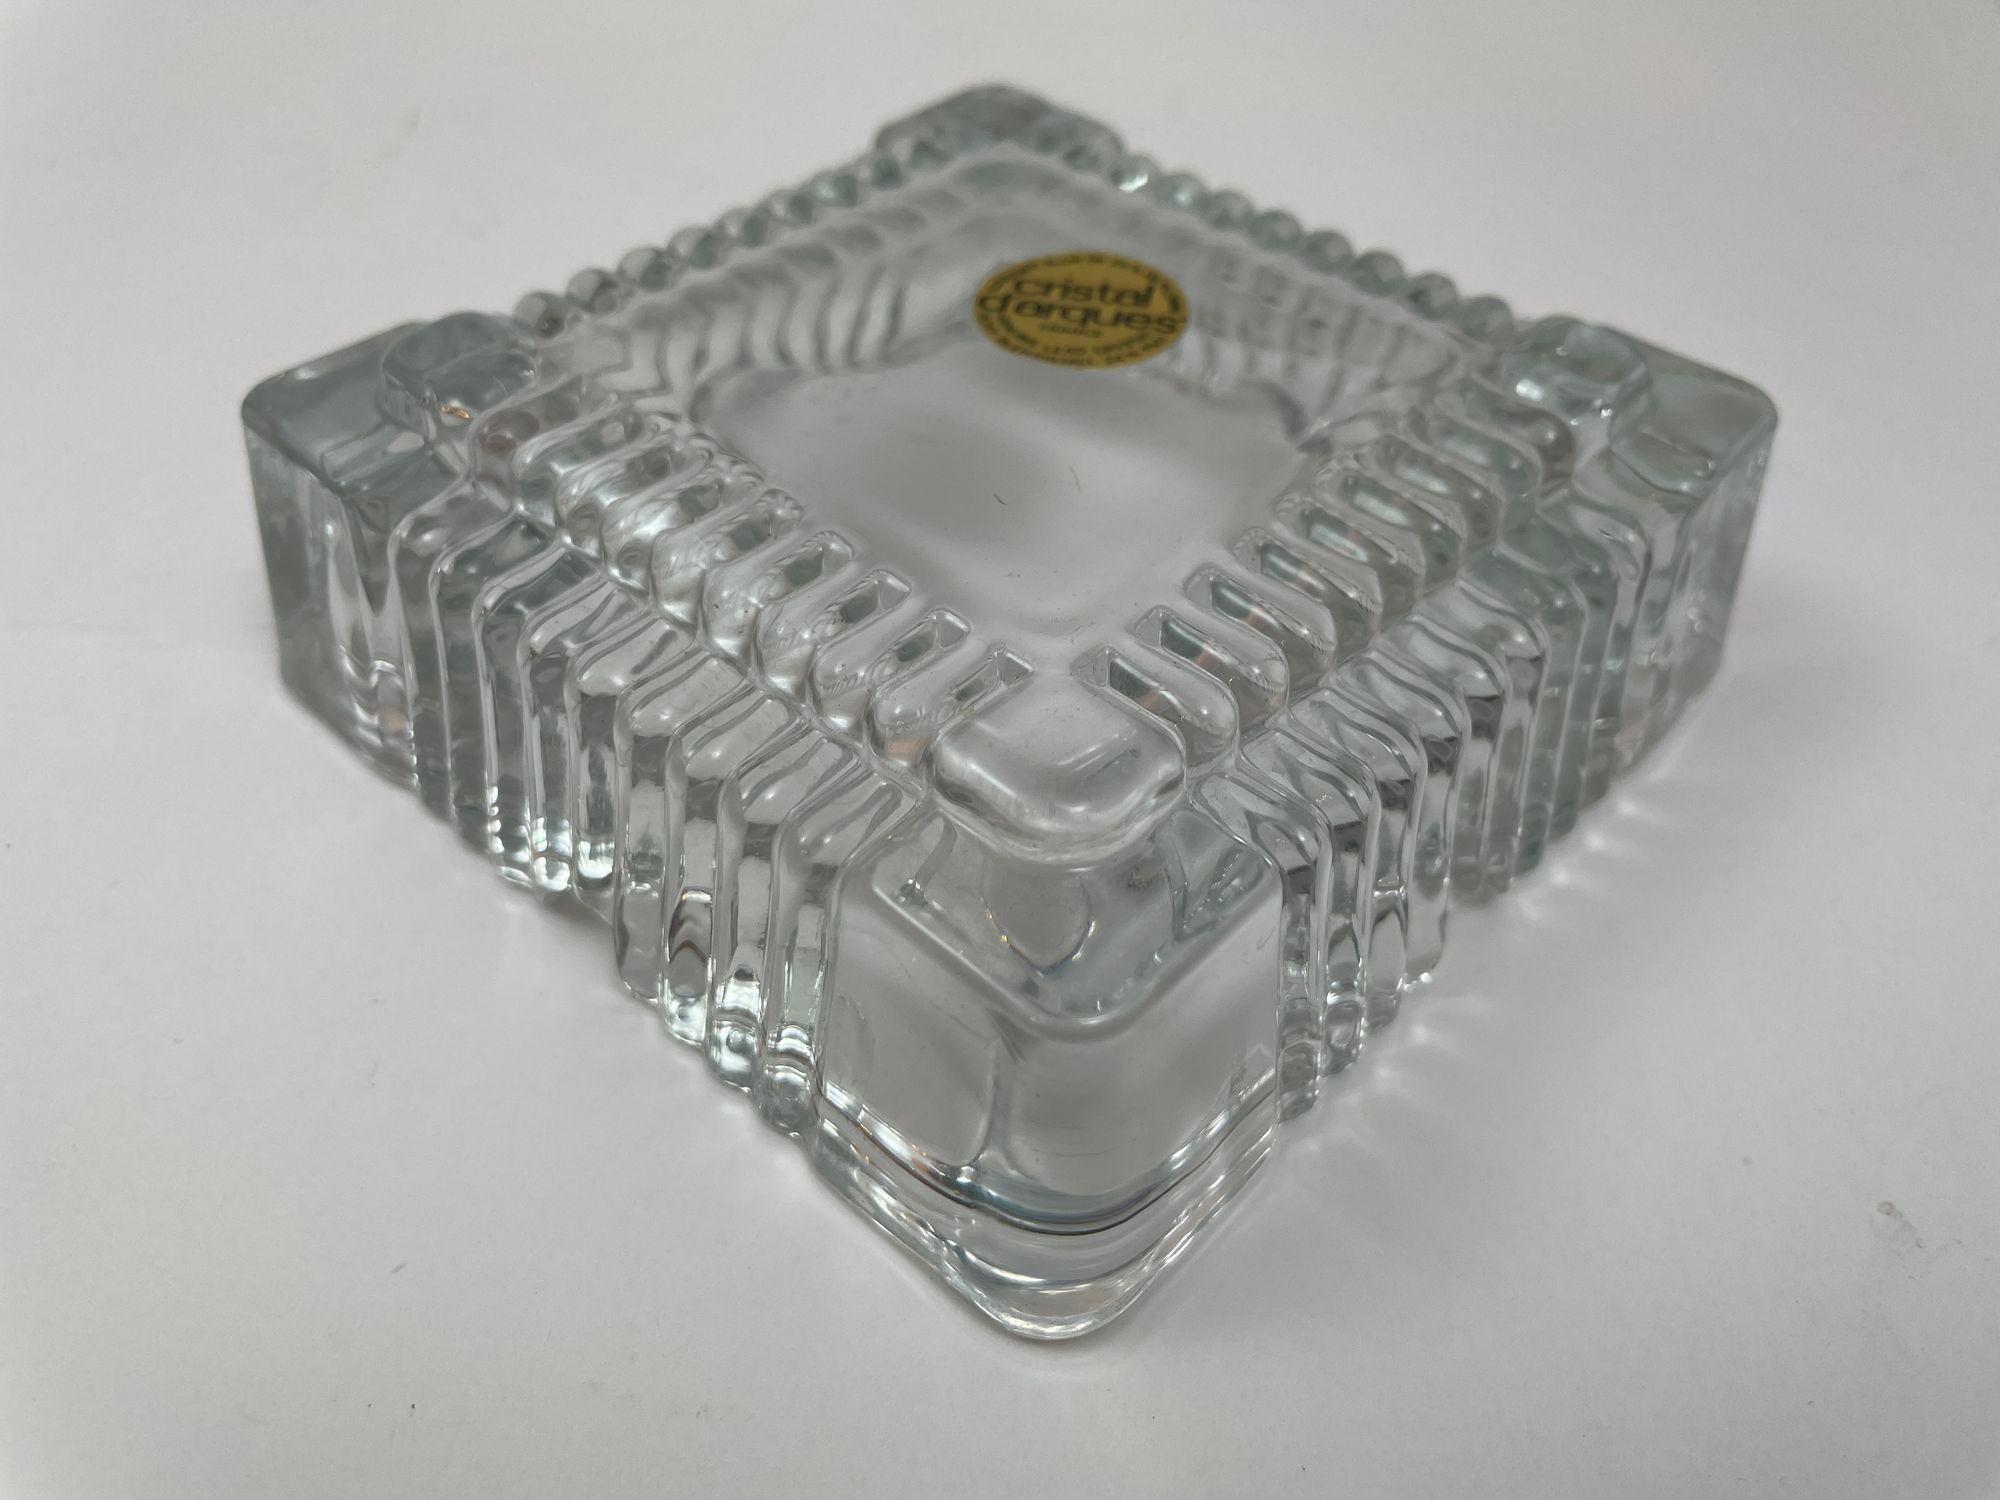 Cristal D'Arques Crystal Ashtray Trinket Dish France Cut Glass Square Catchall For Sale 3